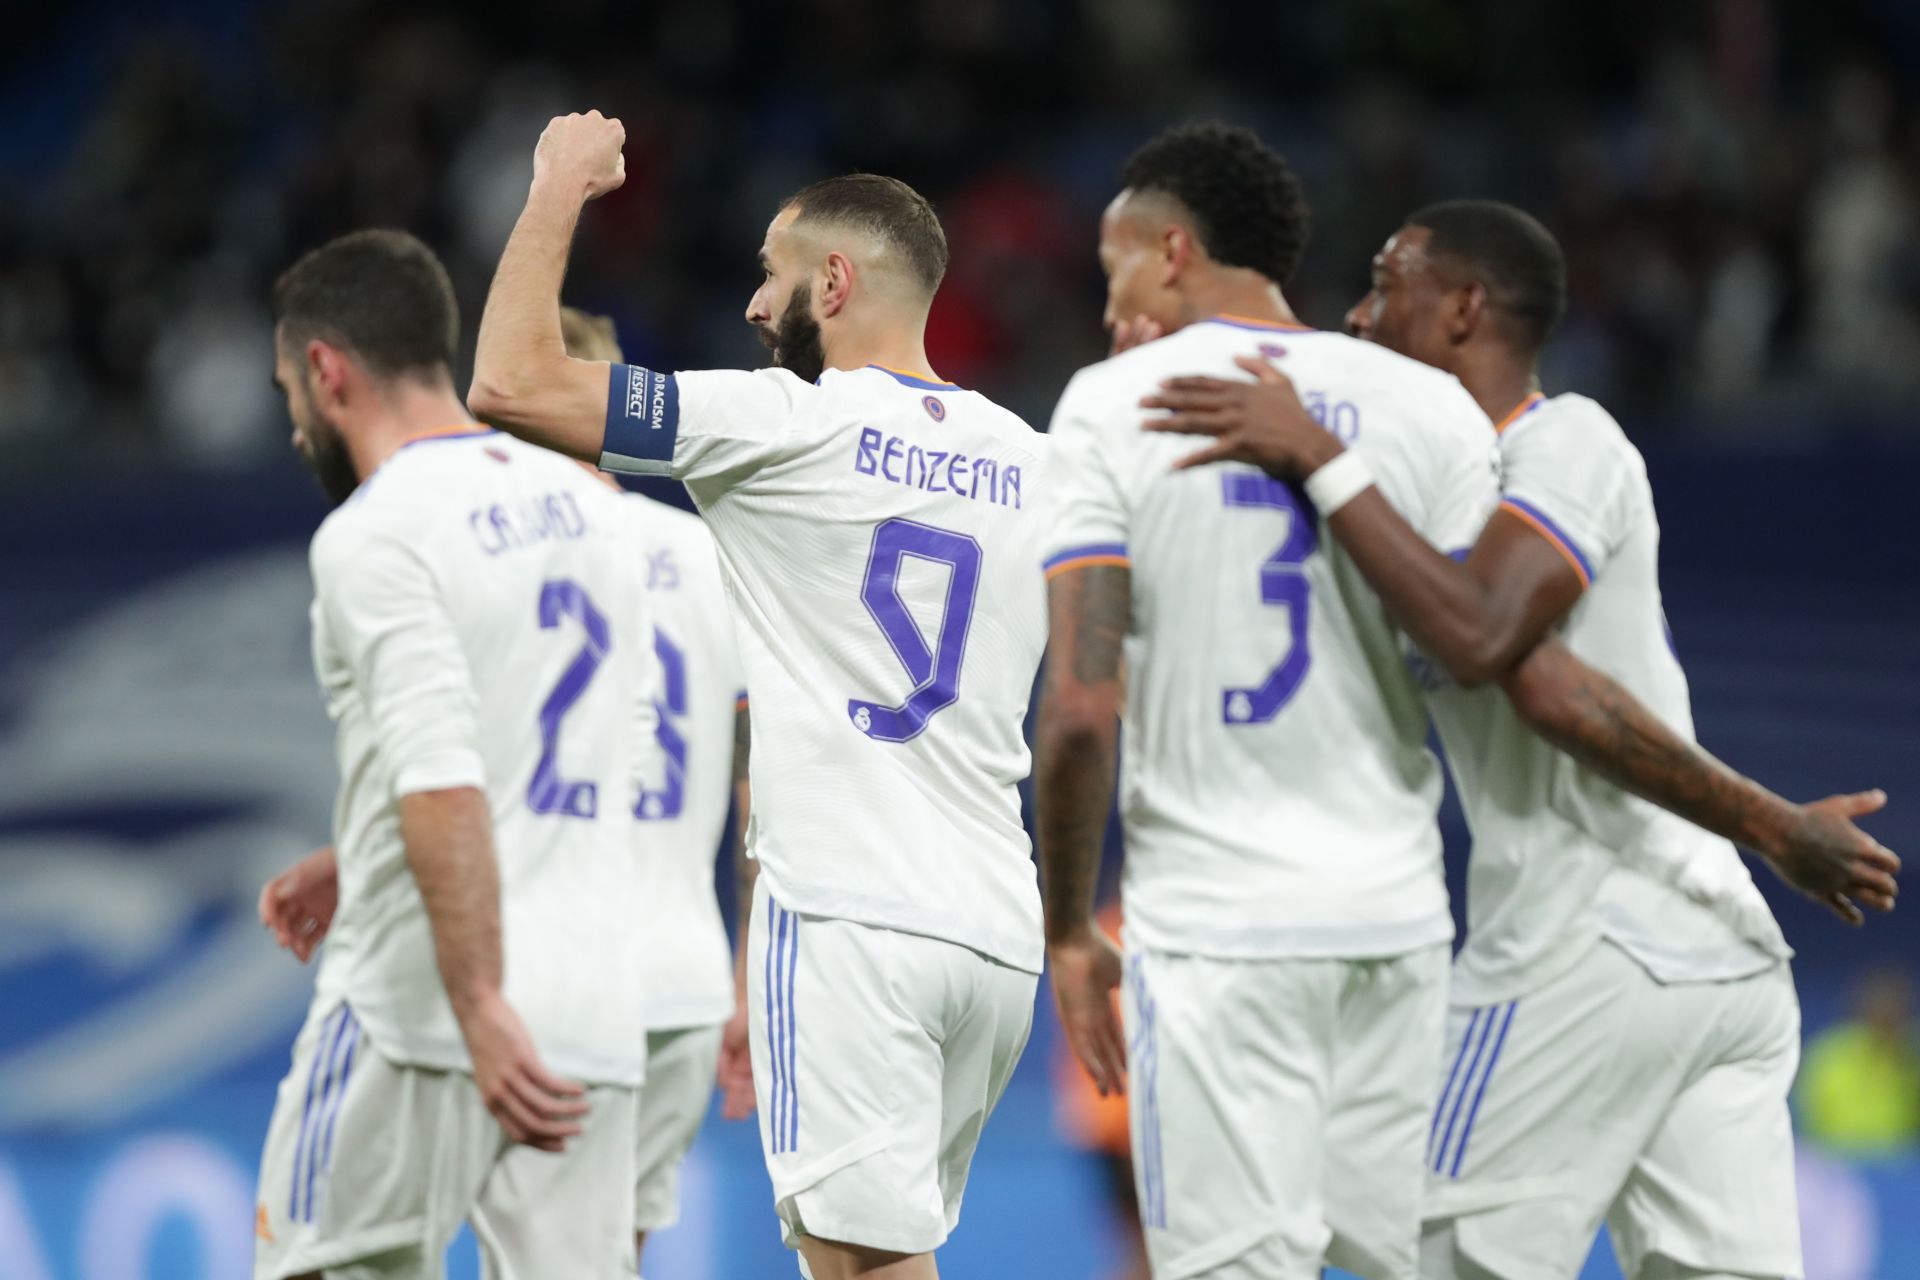 Real Madrid players celebrate after scoring a goal against Sevilla.